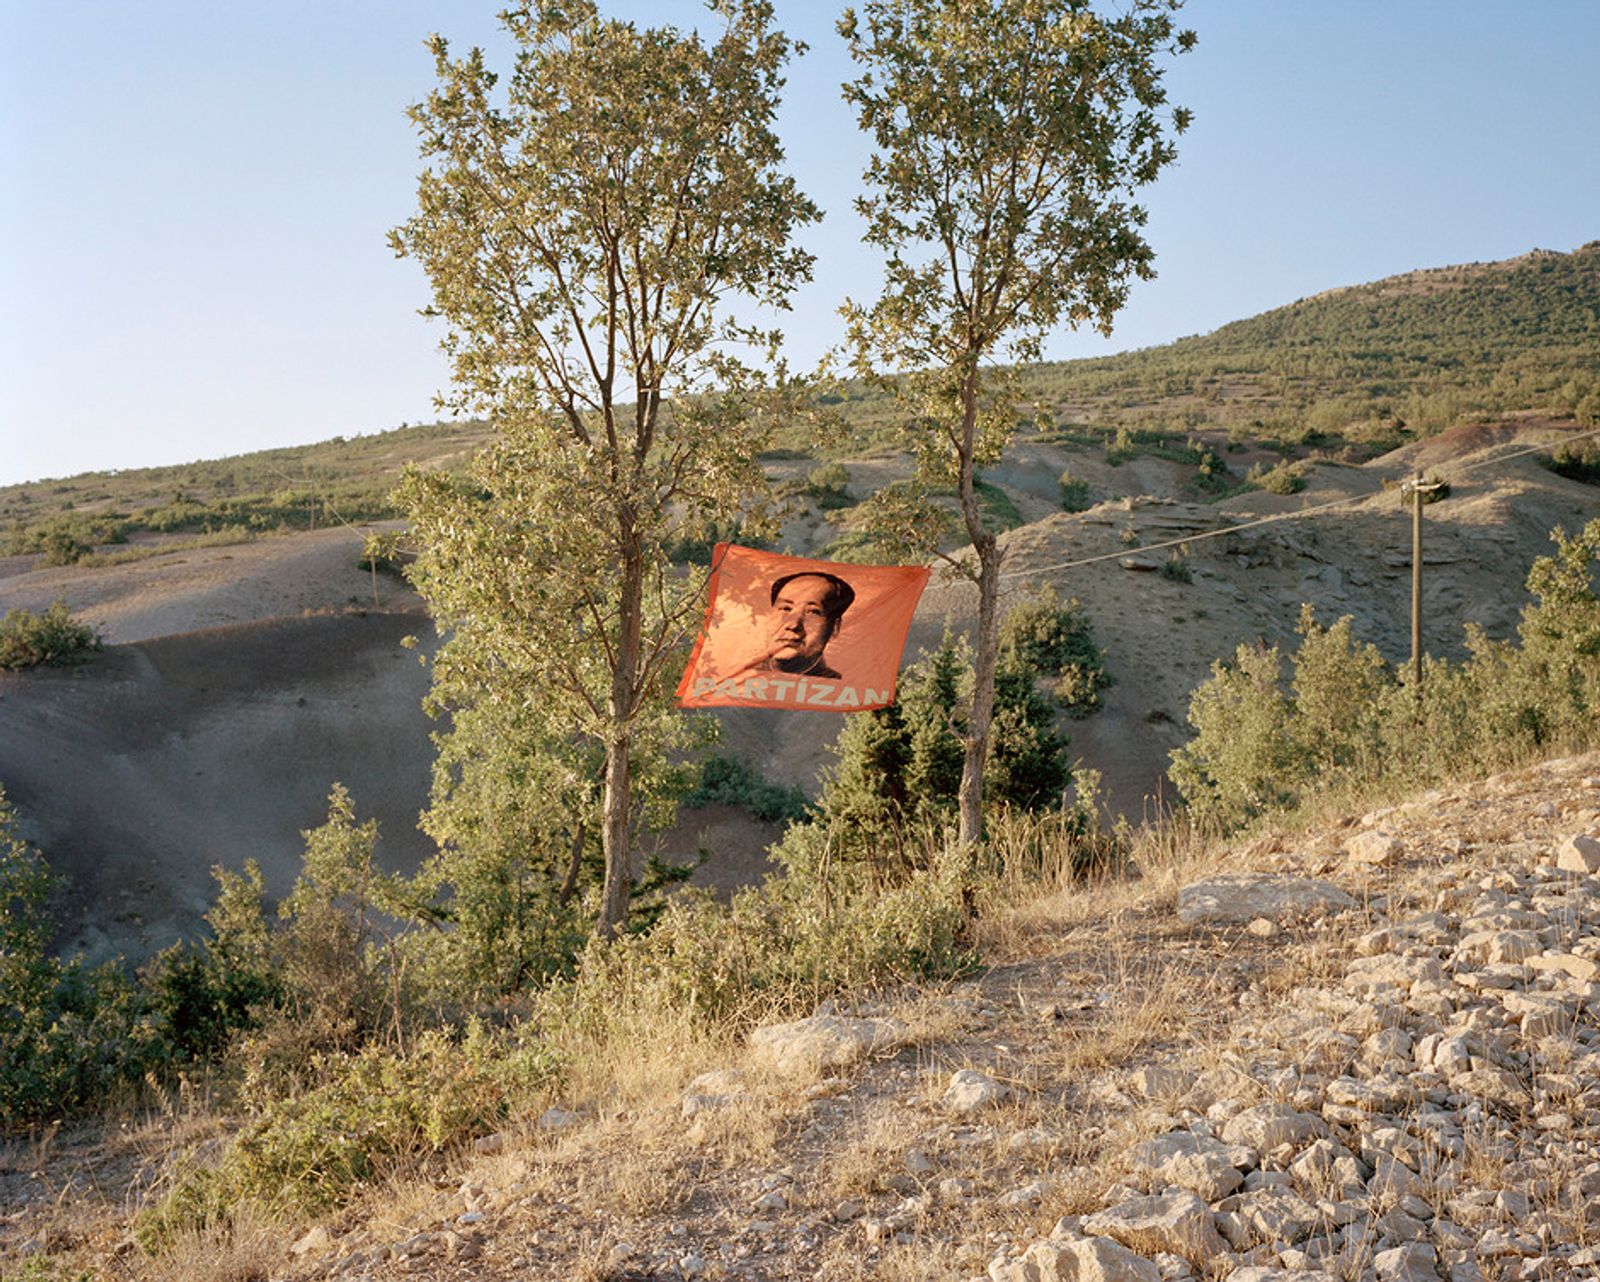 © Miriam Stanke - Mao flag put up by one of the operating guerrilla groups in and around Dersim